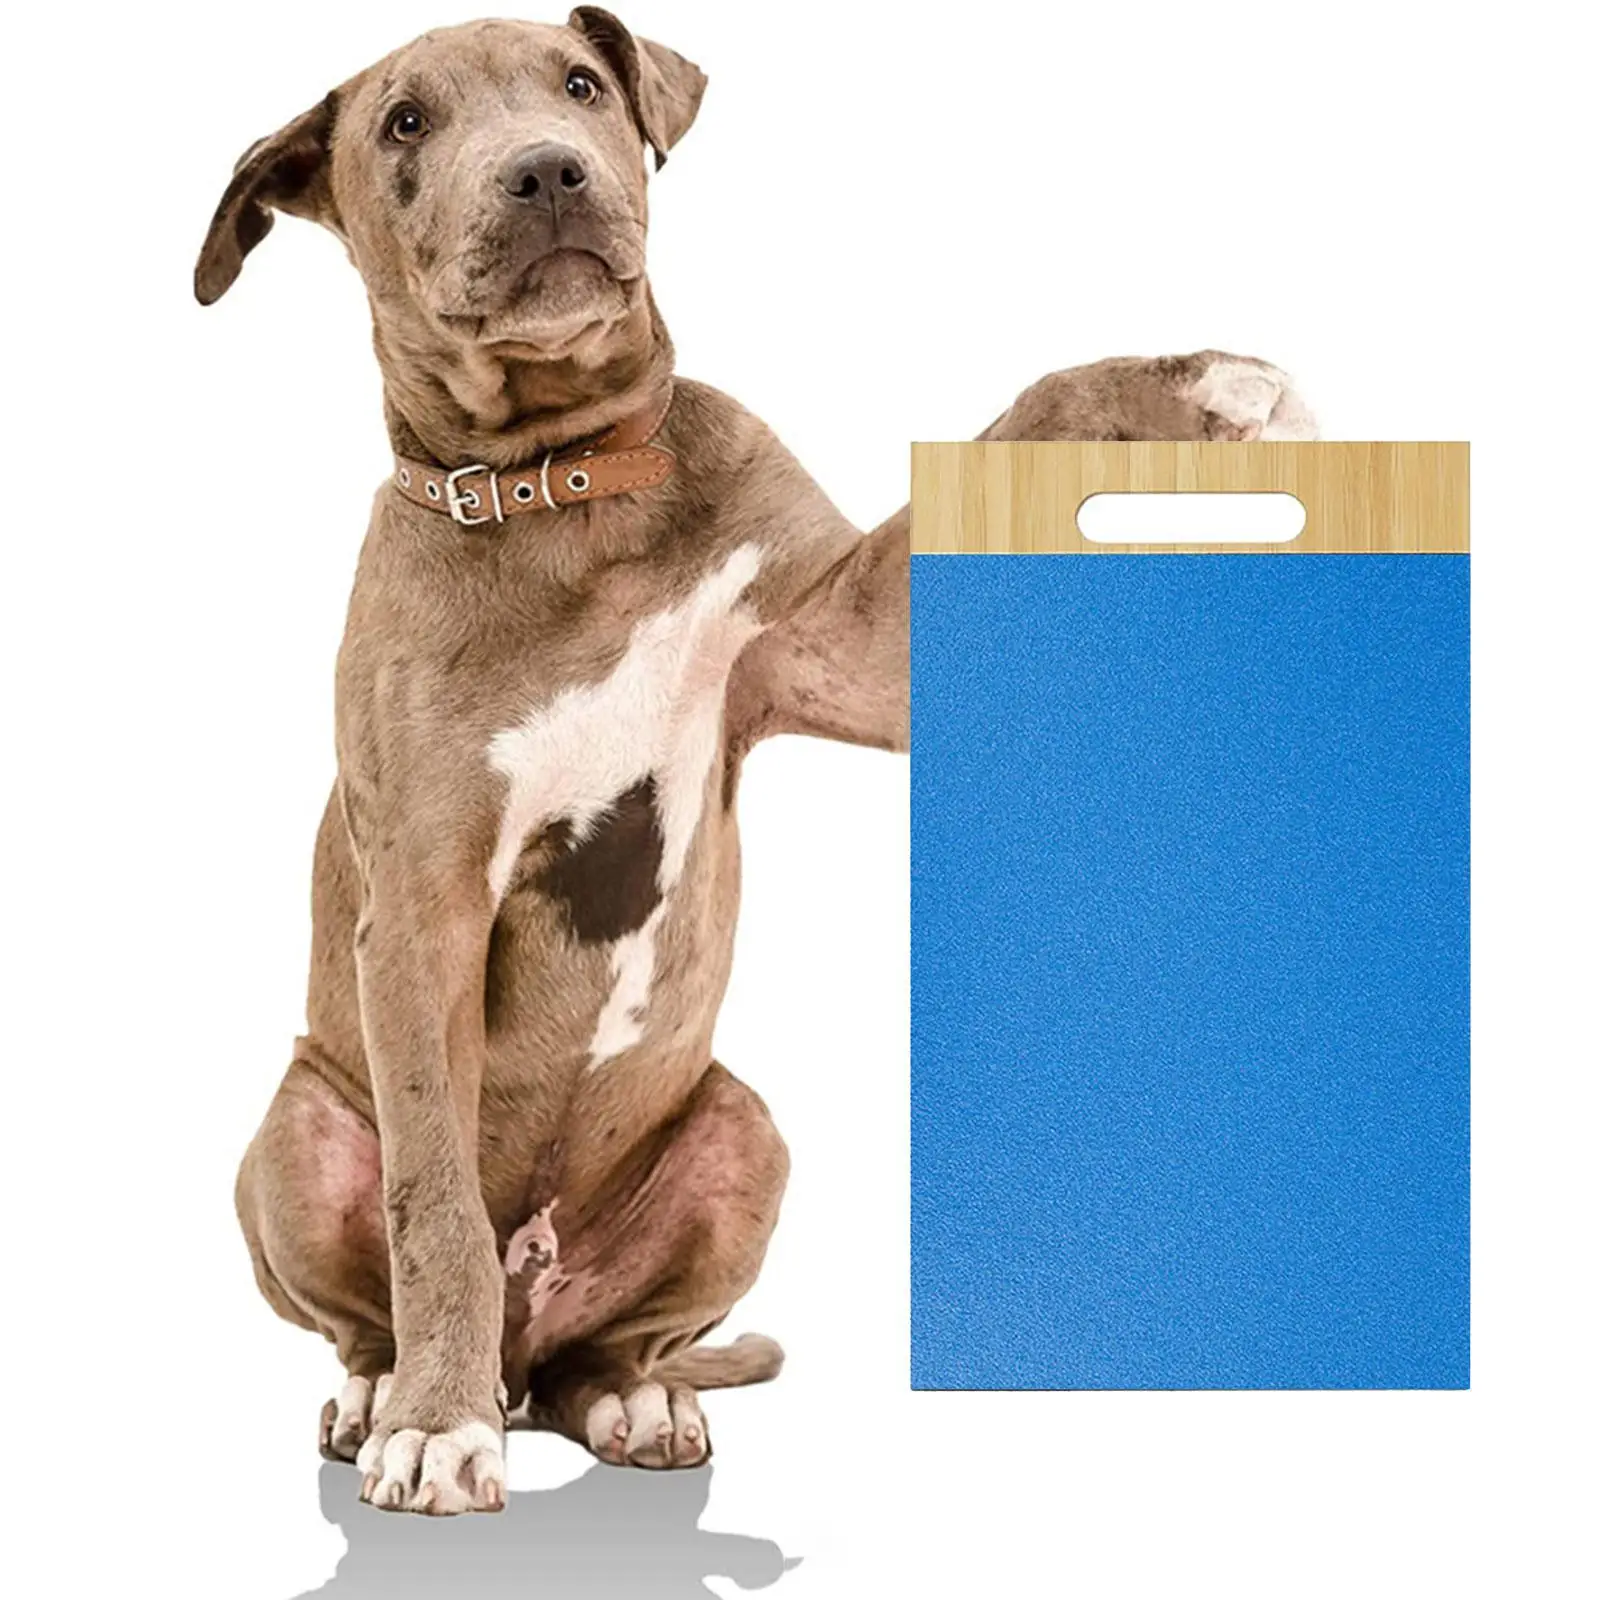 Dog Scratch Pad 14.6 x 8.7Inches Dog Scratching Pad for Large and Small Dogs